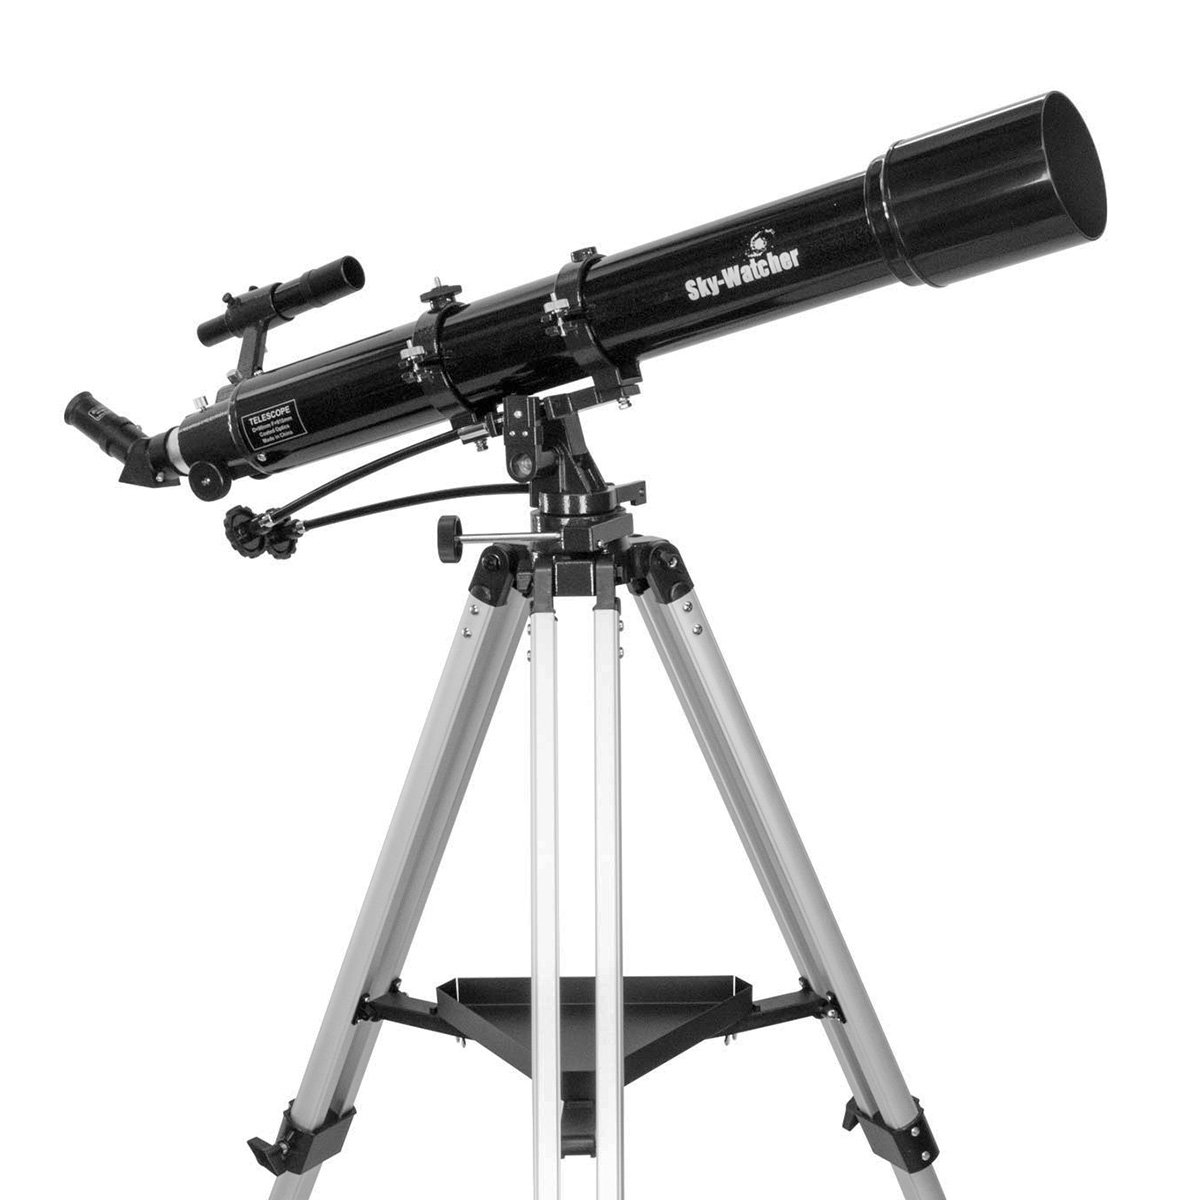 skywatcher: TO CHOOSE A TELESCOPE YOU MUST KNOW THIS